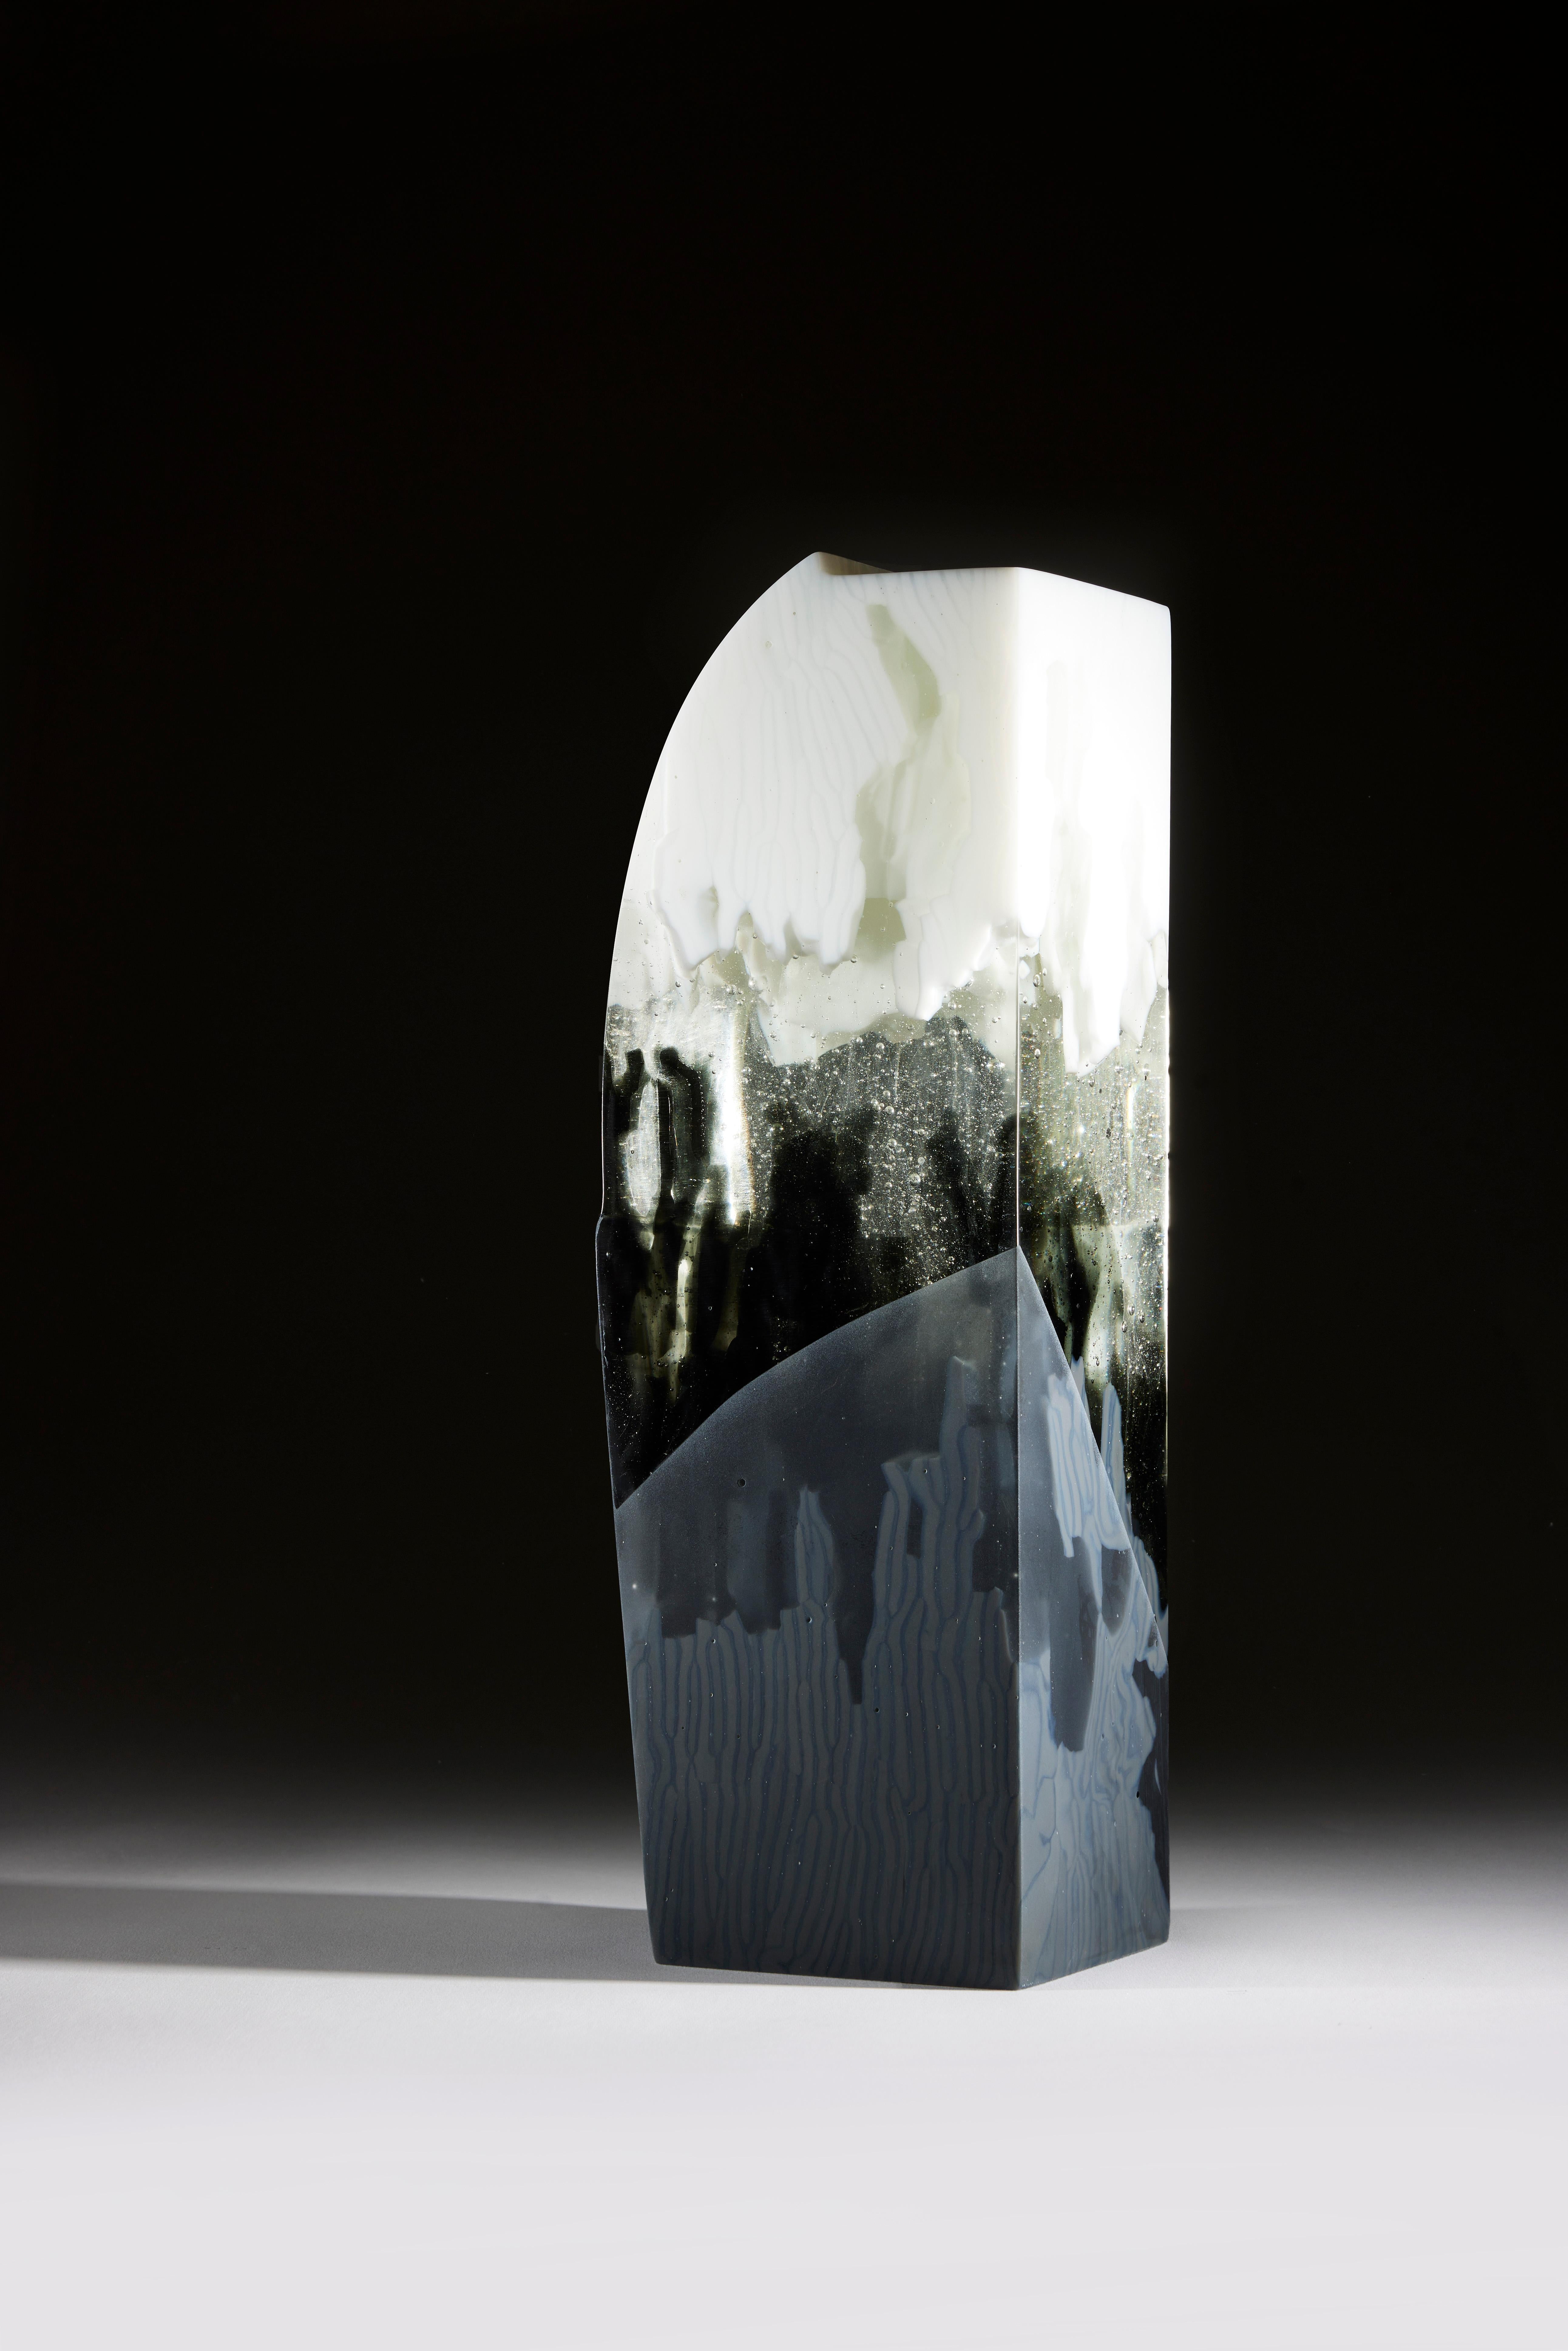 Glass Sculpture Névé One Made in France One of Kind - Black Abstract Sculpture by Perrin & Perrin